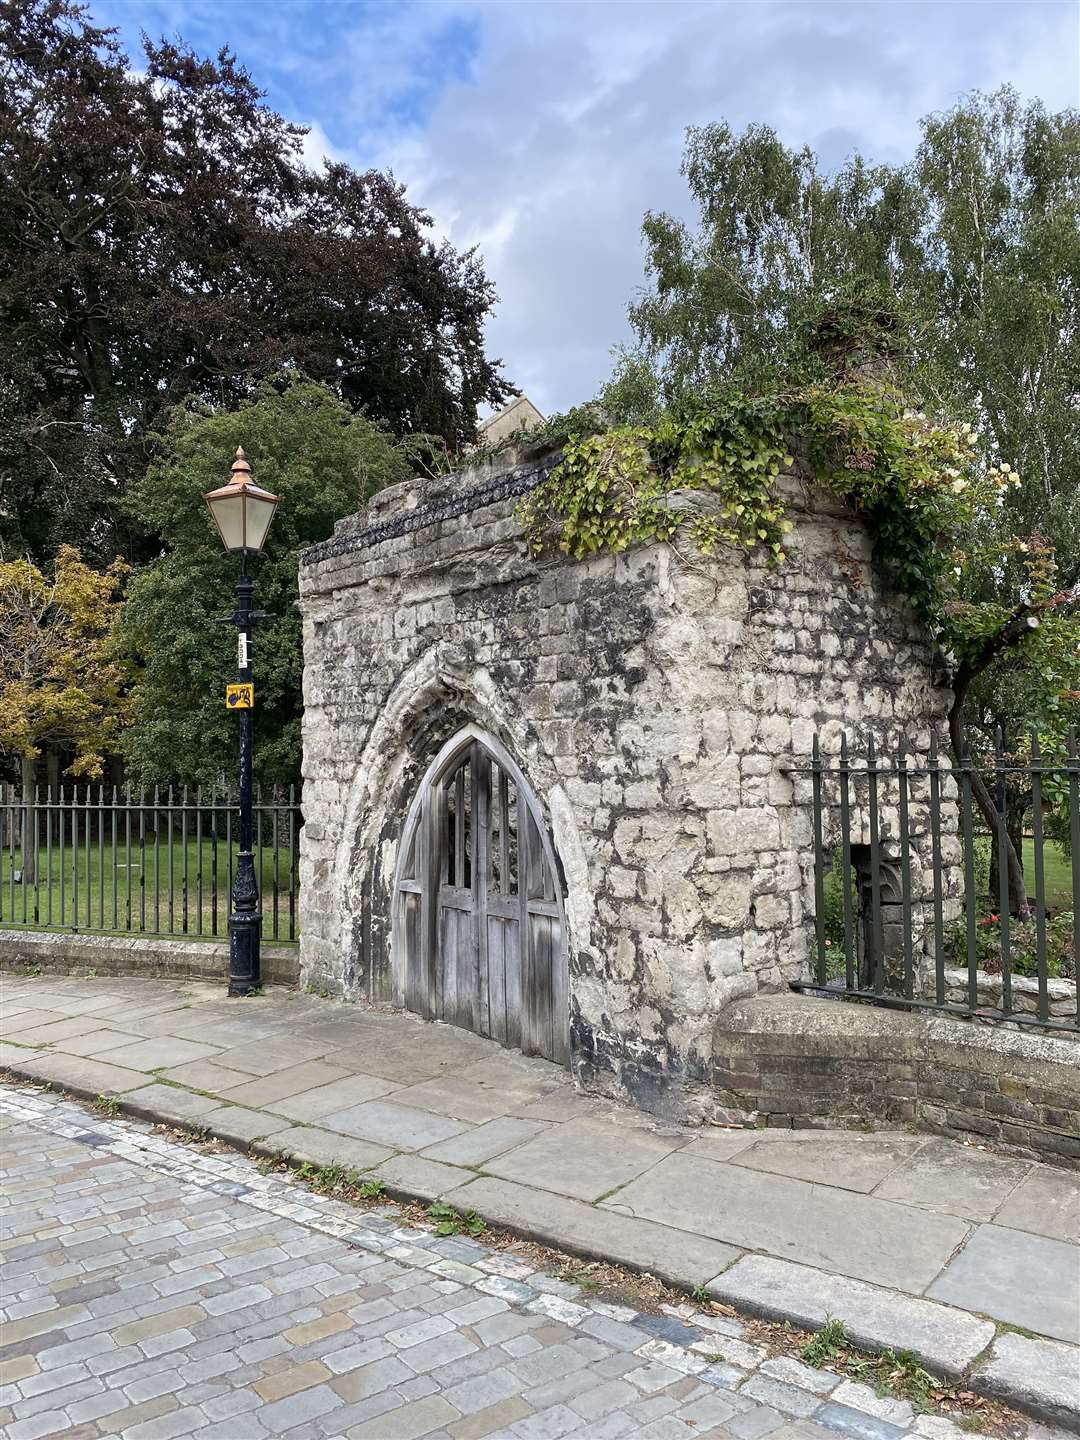 The gate is one of the oldest surviving parts of the cathedral